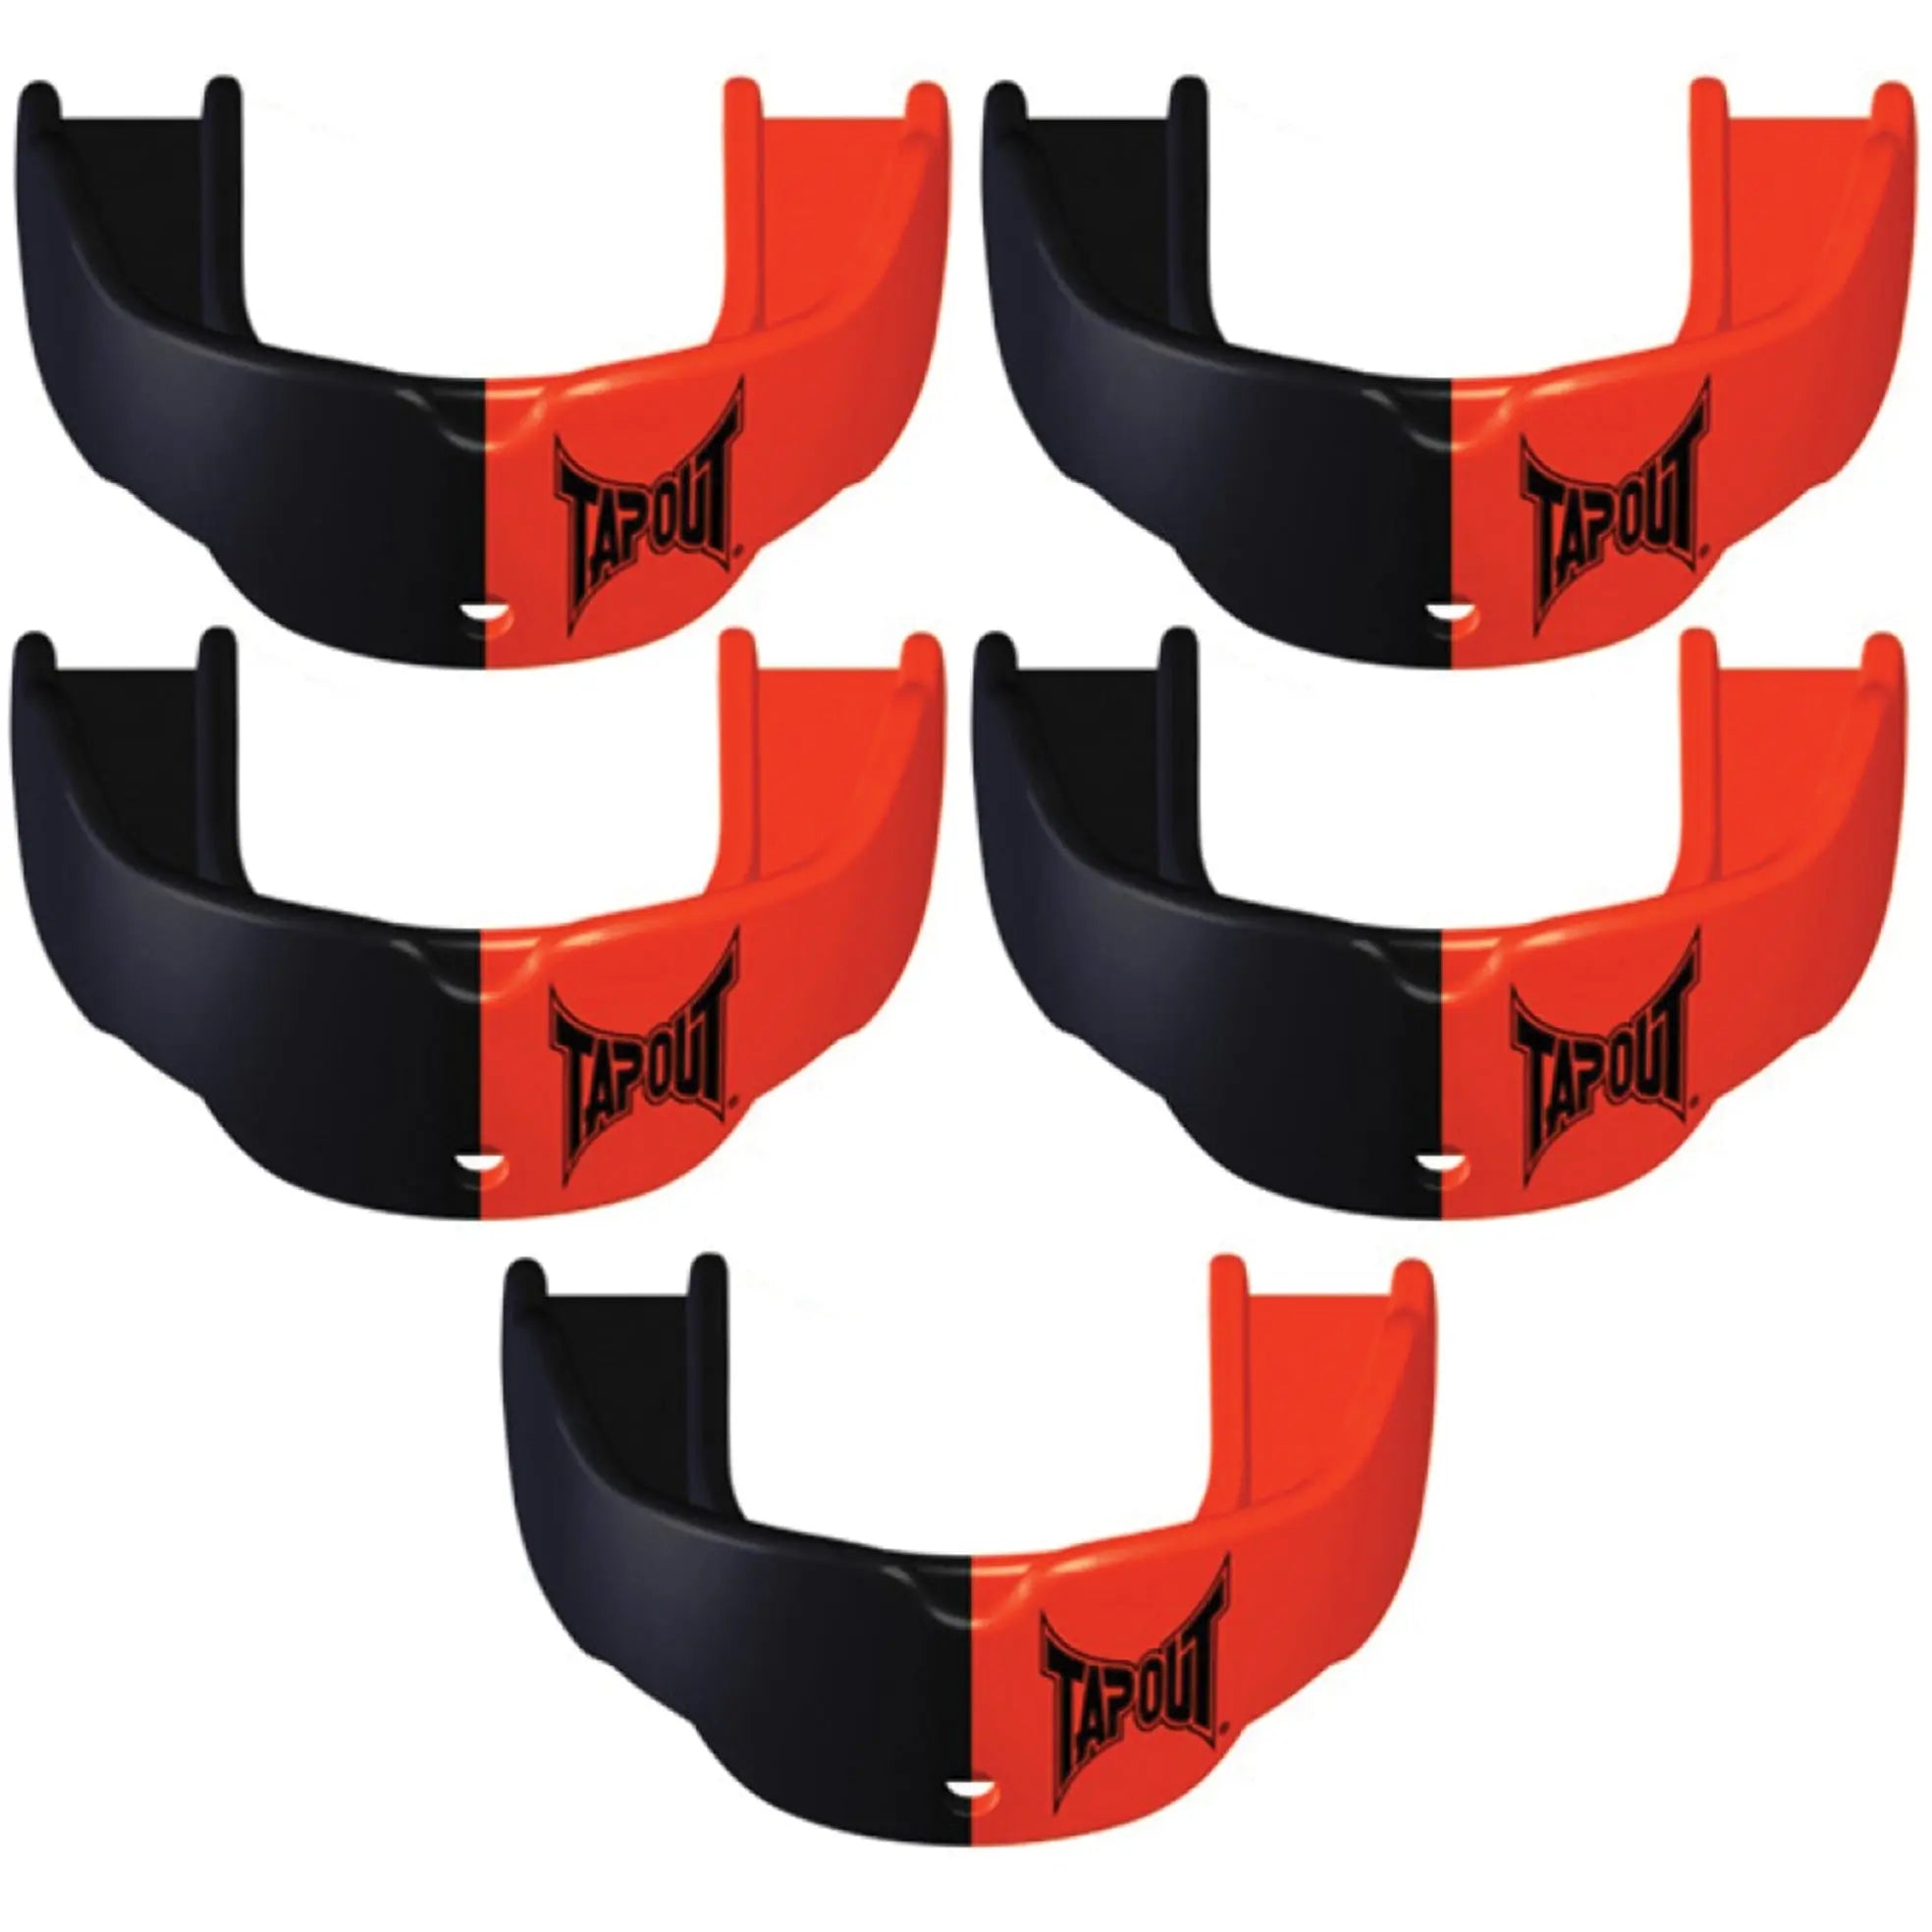 Tapout Adult Protective Sports Mouthguard with Strap 5-Pack - Orange/Black Tapout